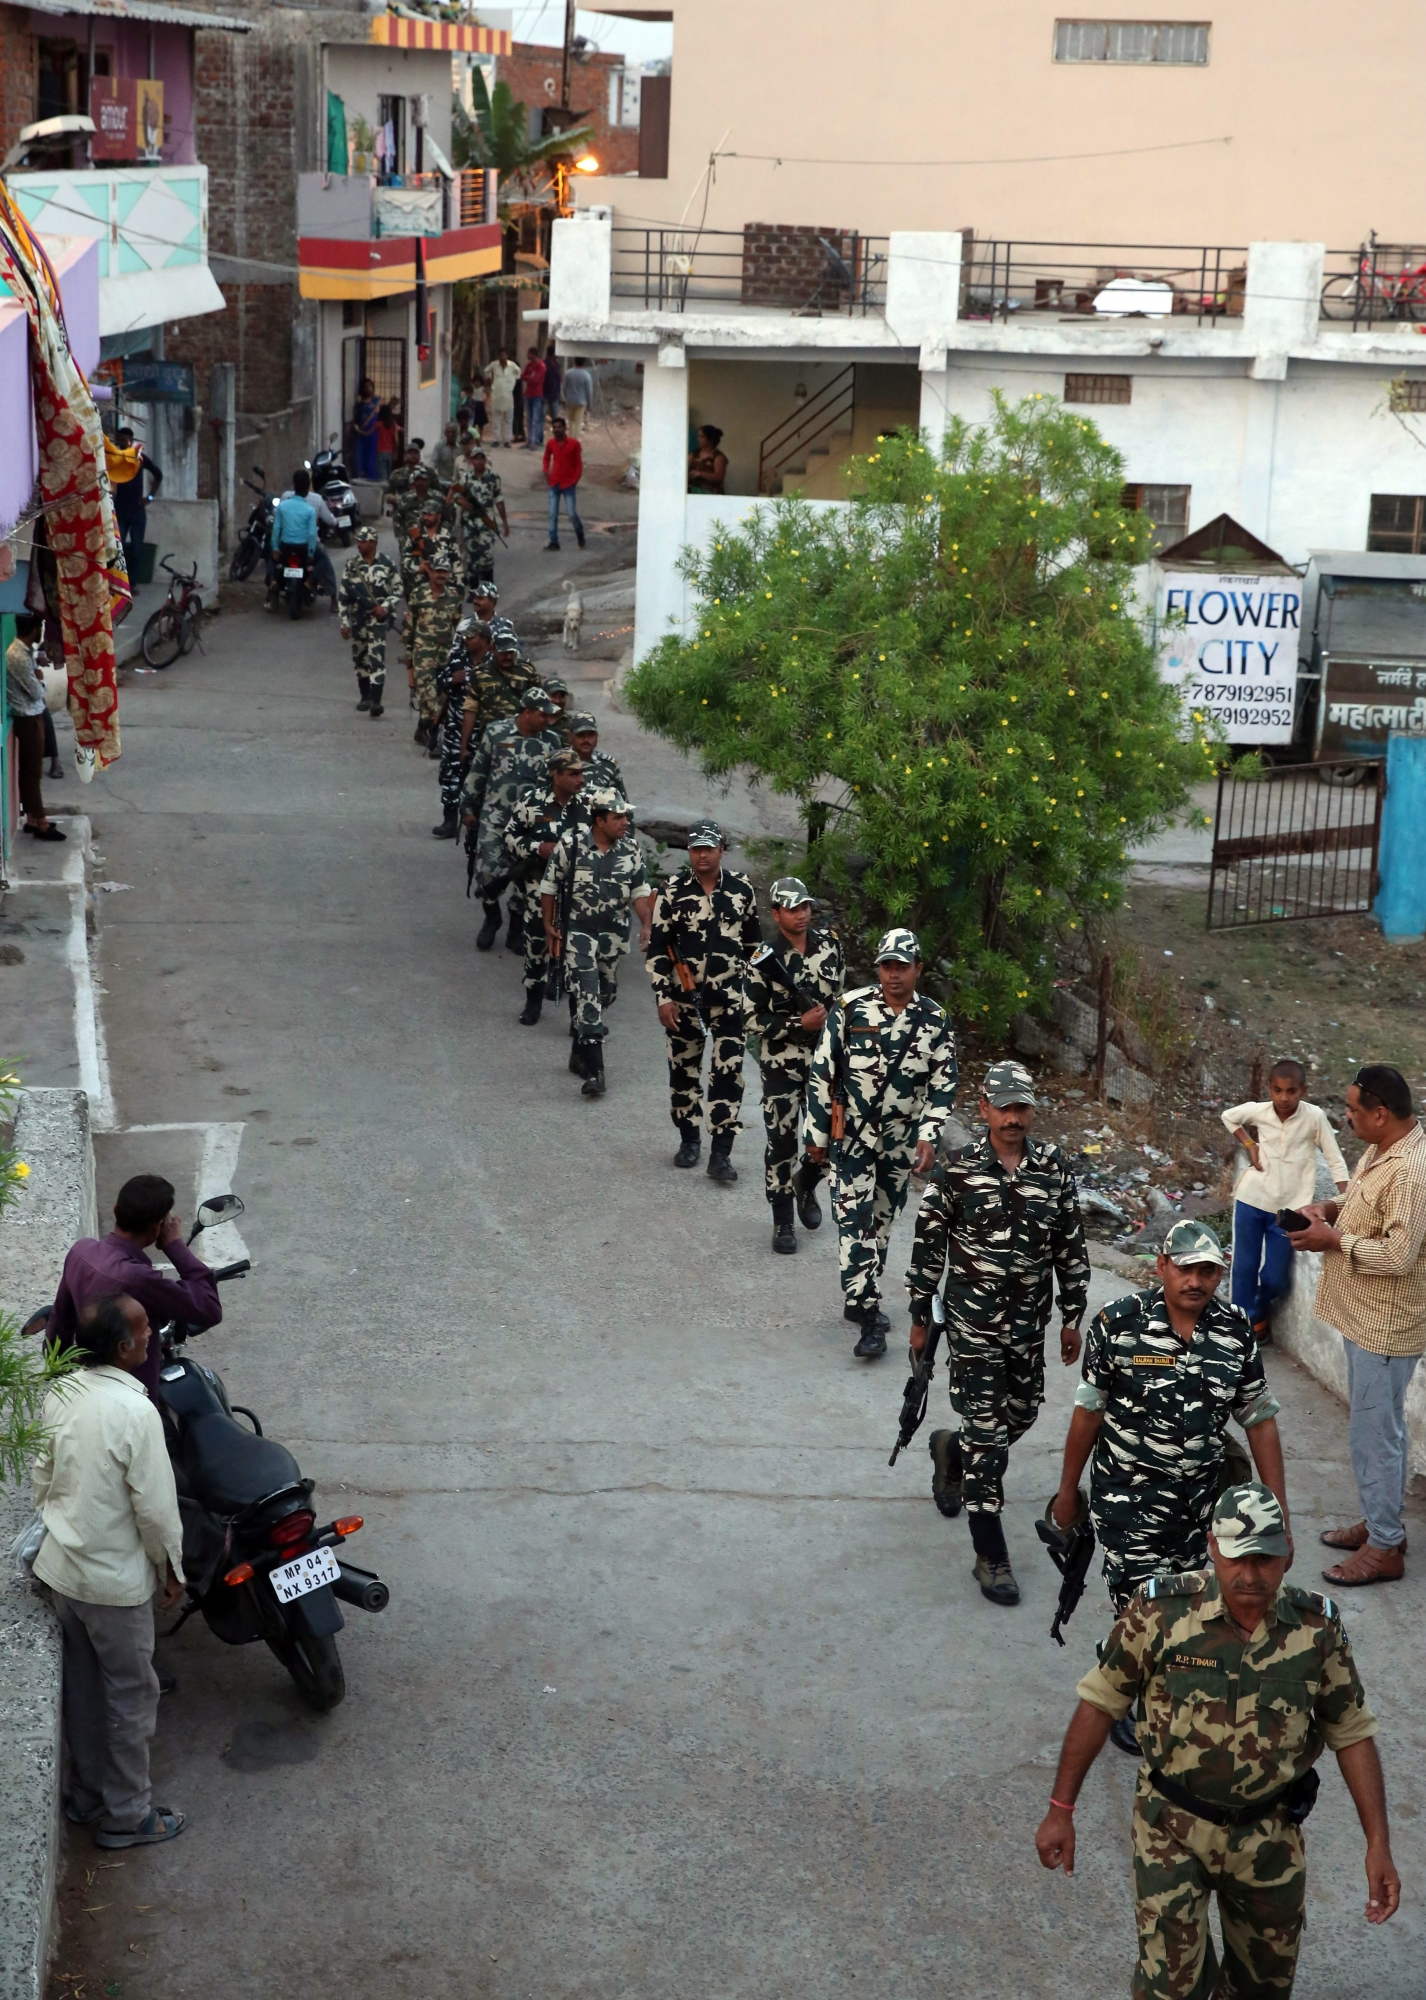 epa07512418 Indian Central Reserve Police Force (CRPF) paramilitary officers conduct a flag march in the streets, ahead of the general election in Bhopal, India, 17 April 2019. The parliamentary elections, which began on 11 April 2019 are to be conducted in seven phases throughout India.  EPA/SANJEEV GUPTA INDIA ELECTIONS SECURITY